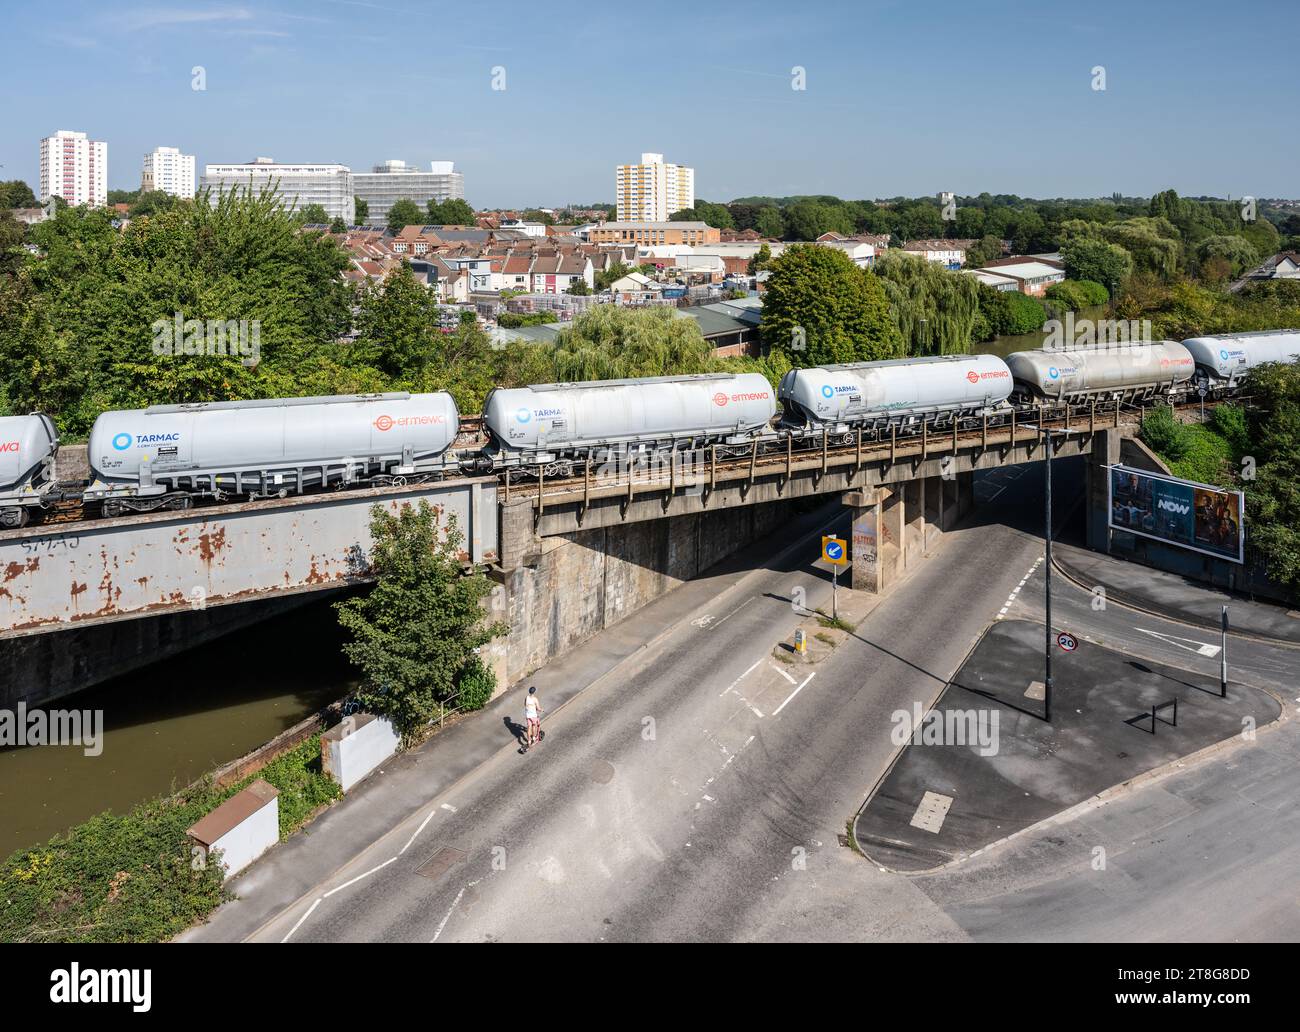 A freight train of tanker wagons crosses Feeder Road and the Feeder Canal in the industrial St Philip's Marsh area of Bristol, with the Barton Hill ne Stock Photo